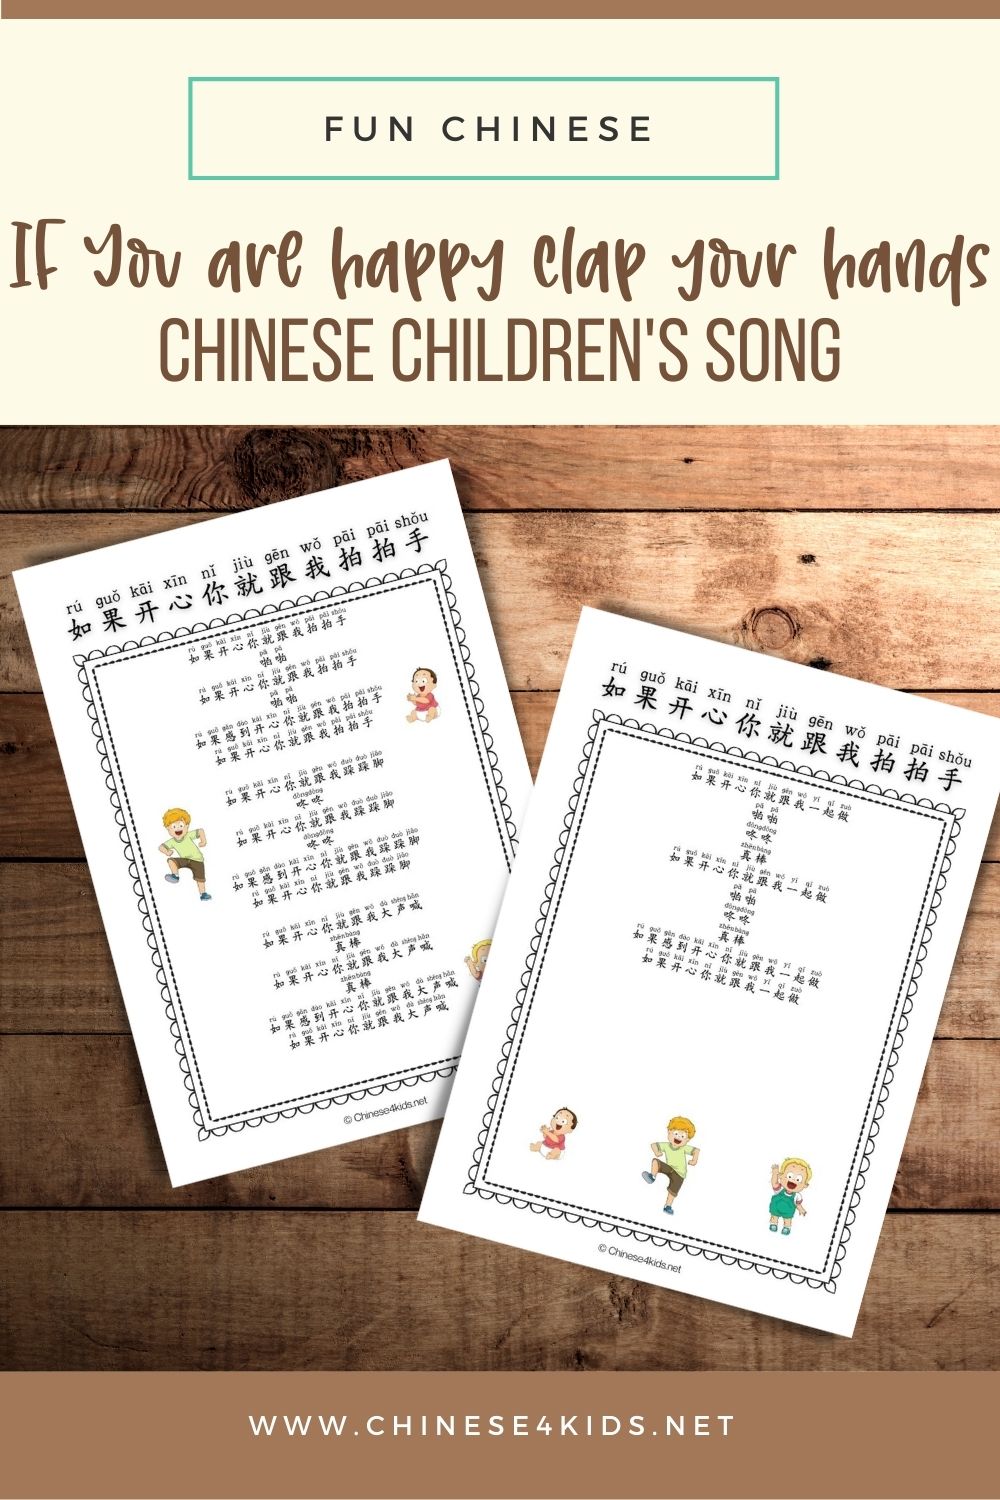 If you are happy clap your hands Chinese children's song lyrics - learn Chinese children's song and learn Chinese language #Chinese4kdis #learnChinese #mandarinChinese #Chineselearning